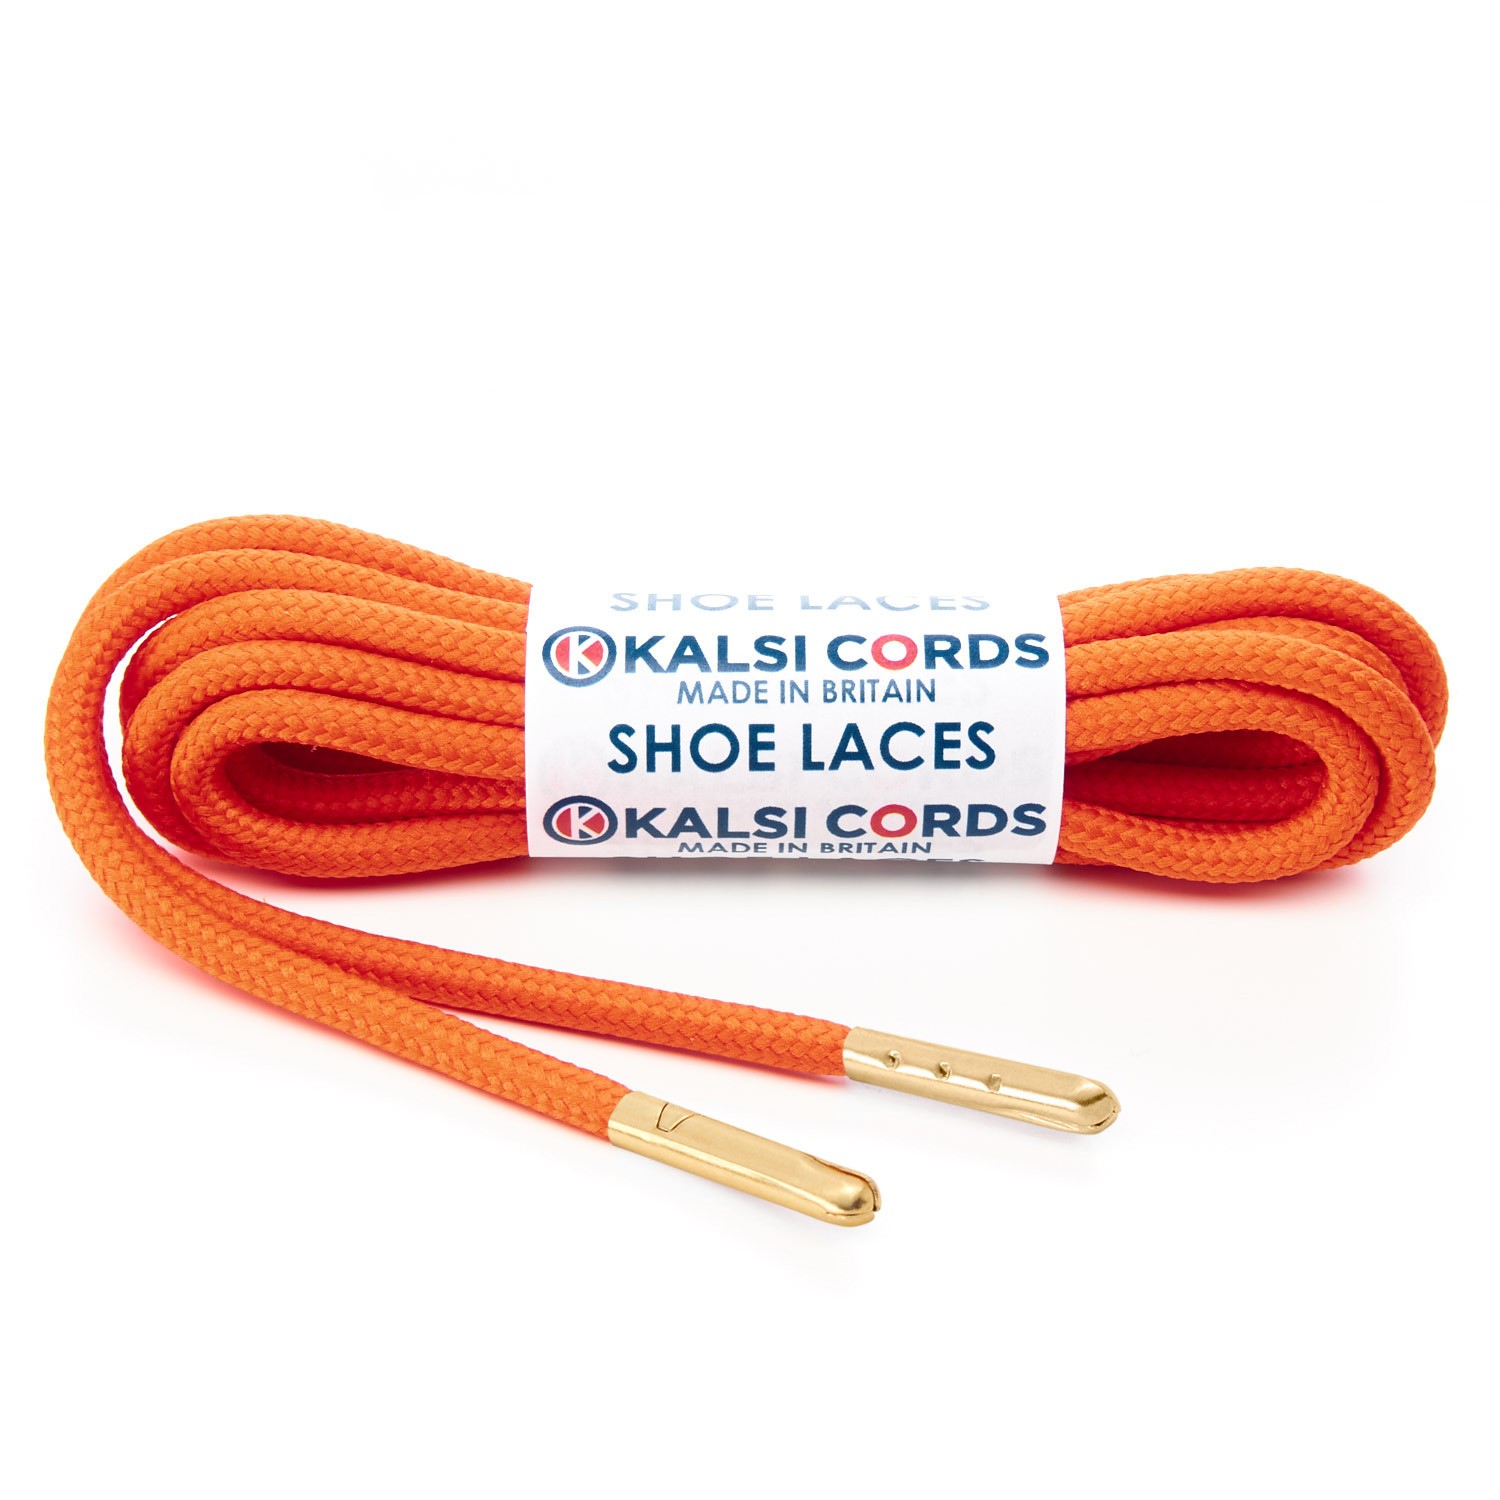 T621 5mm Round Polyester Shoe Laces Orange 1 Gold Metal Tip Kalsi Cords